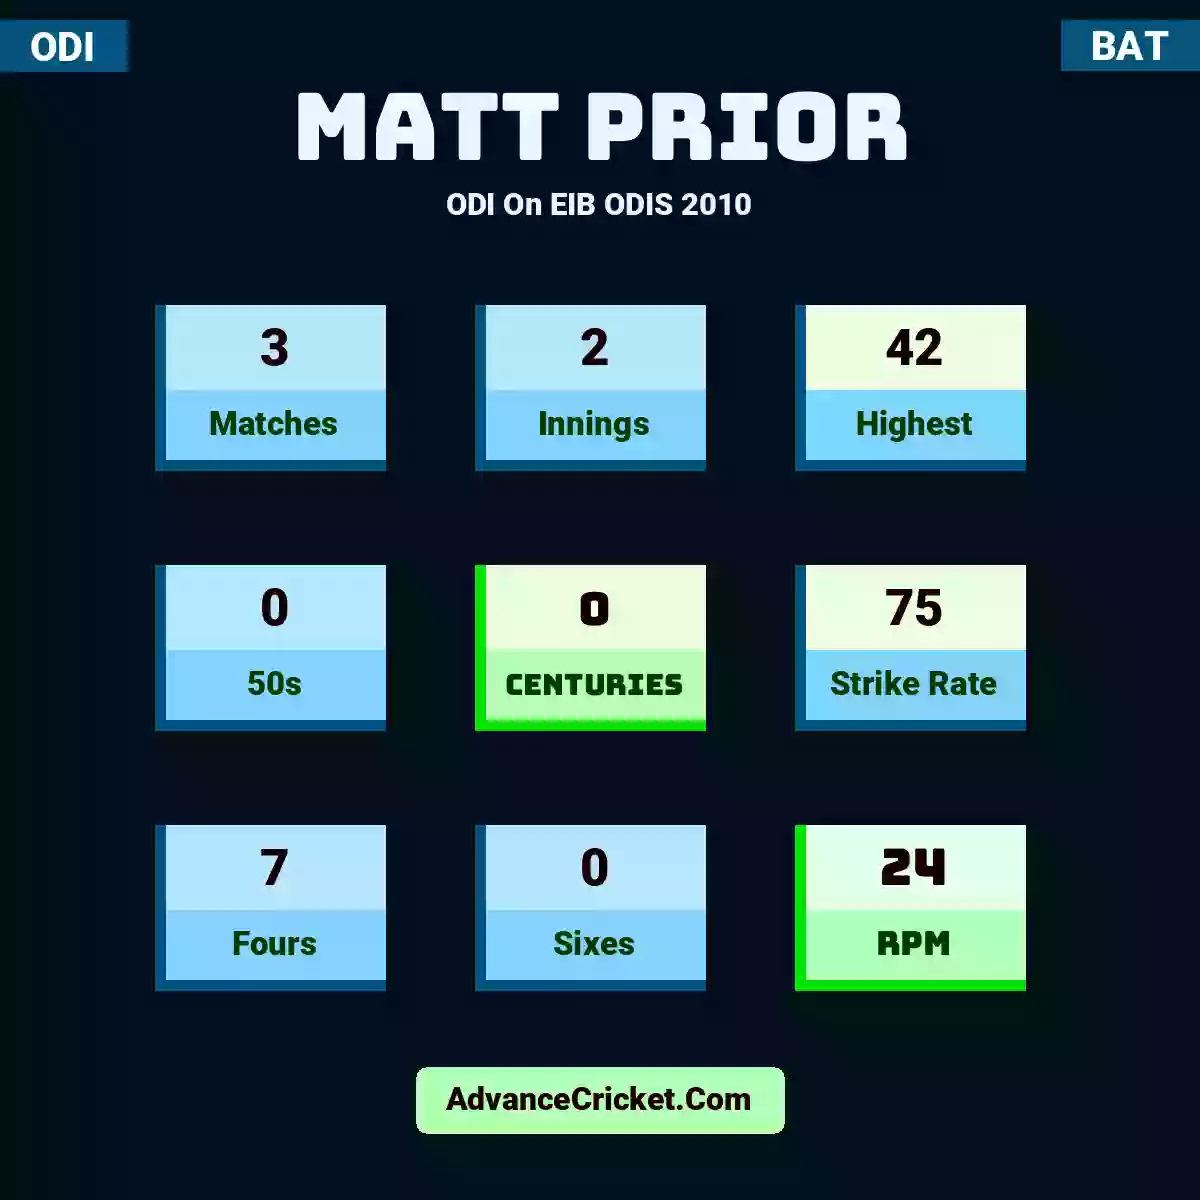 Matt Prior ODI  On EIB ODIS 2010, Matt Prior played 3 matches, scored 42 runs as highest, 0 half-centuries, and 0 centuries, with a strike rate of 75. M.Prior hit 7 fours and 0 sixes, with an RPM of 24.